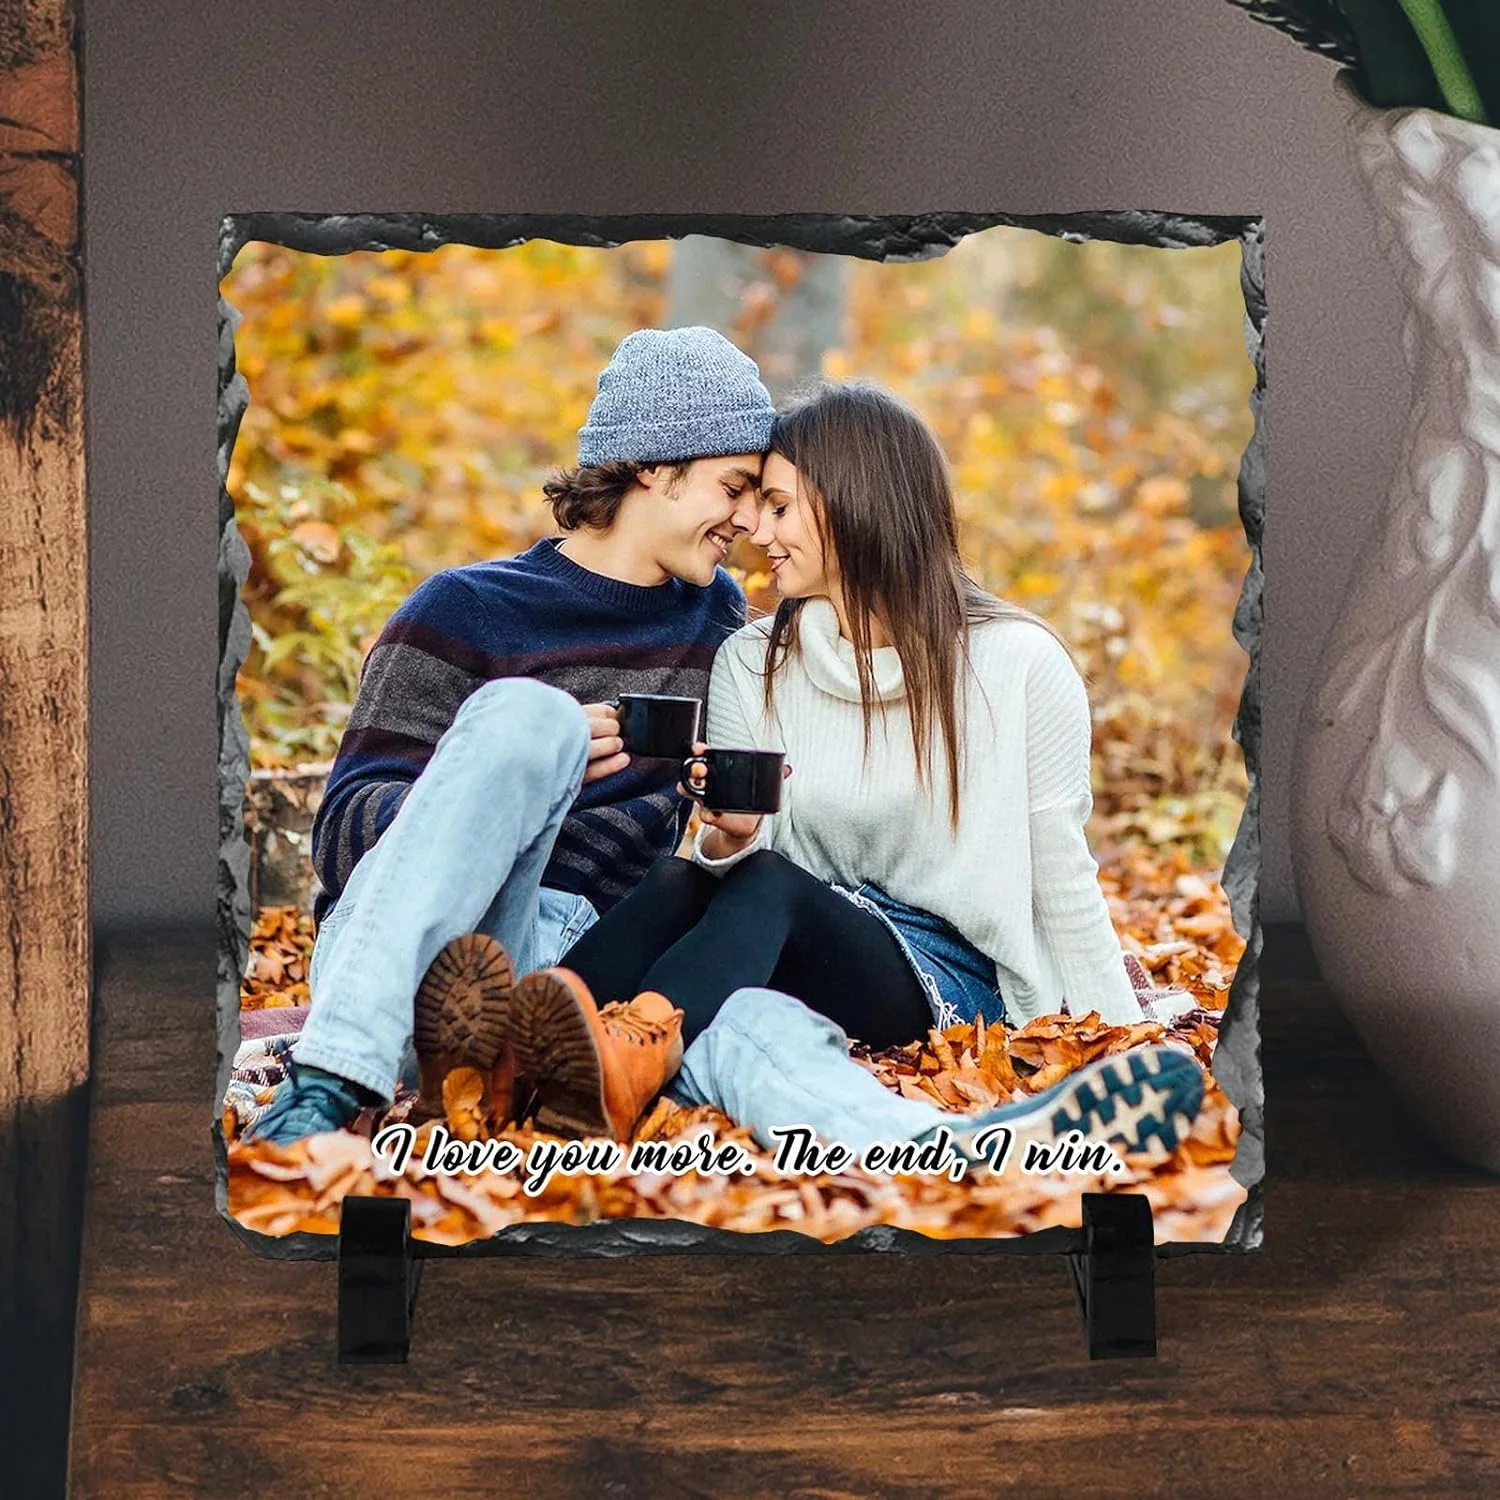 

Personalized Slate Picture Frames Square Frame Custom Photo And Text Wedding Anniversary Birthday Valentine's Day Gifts